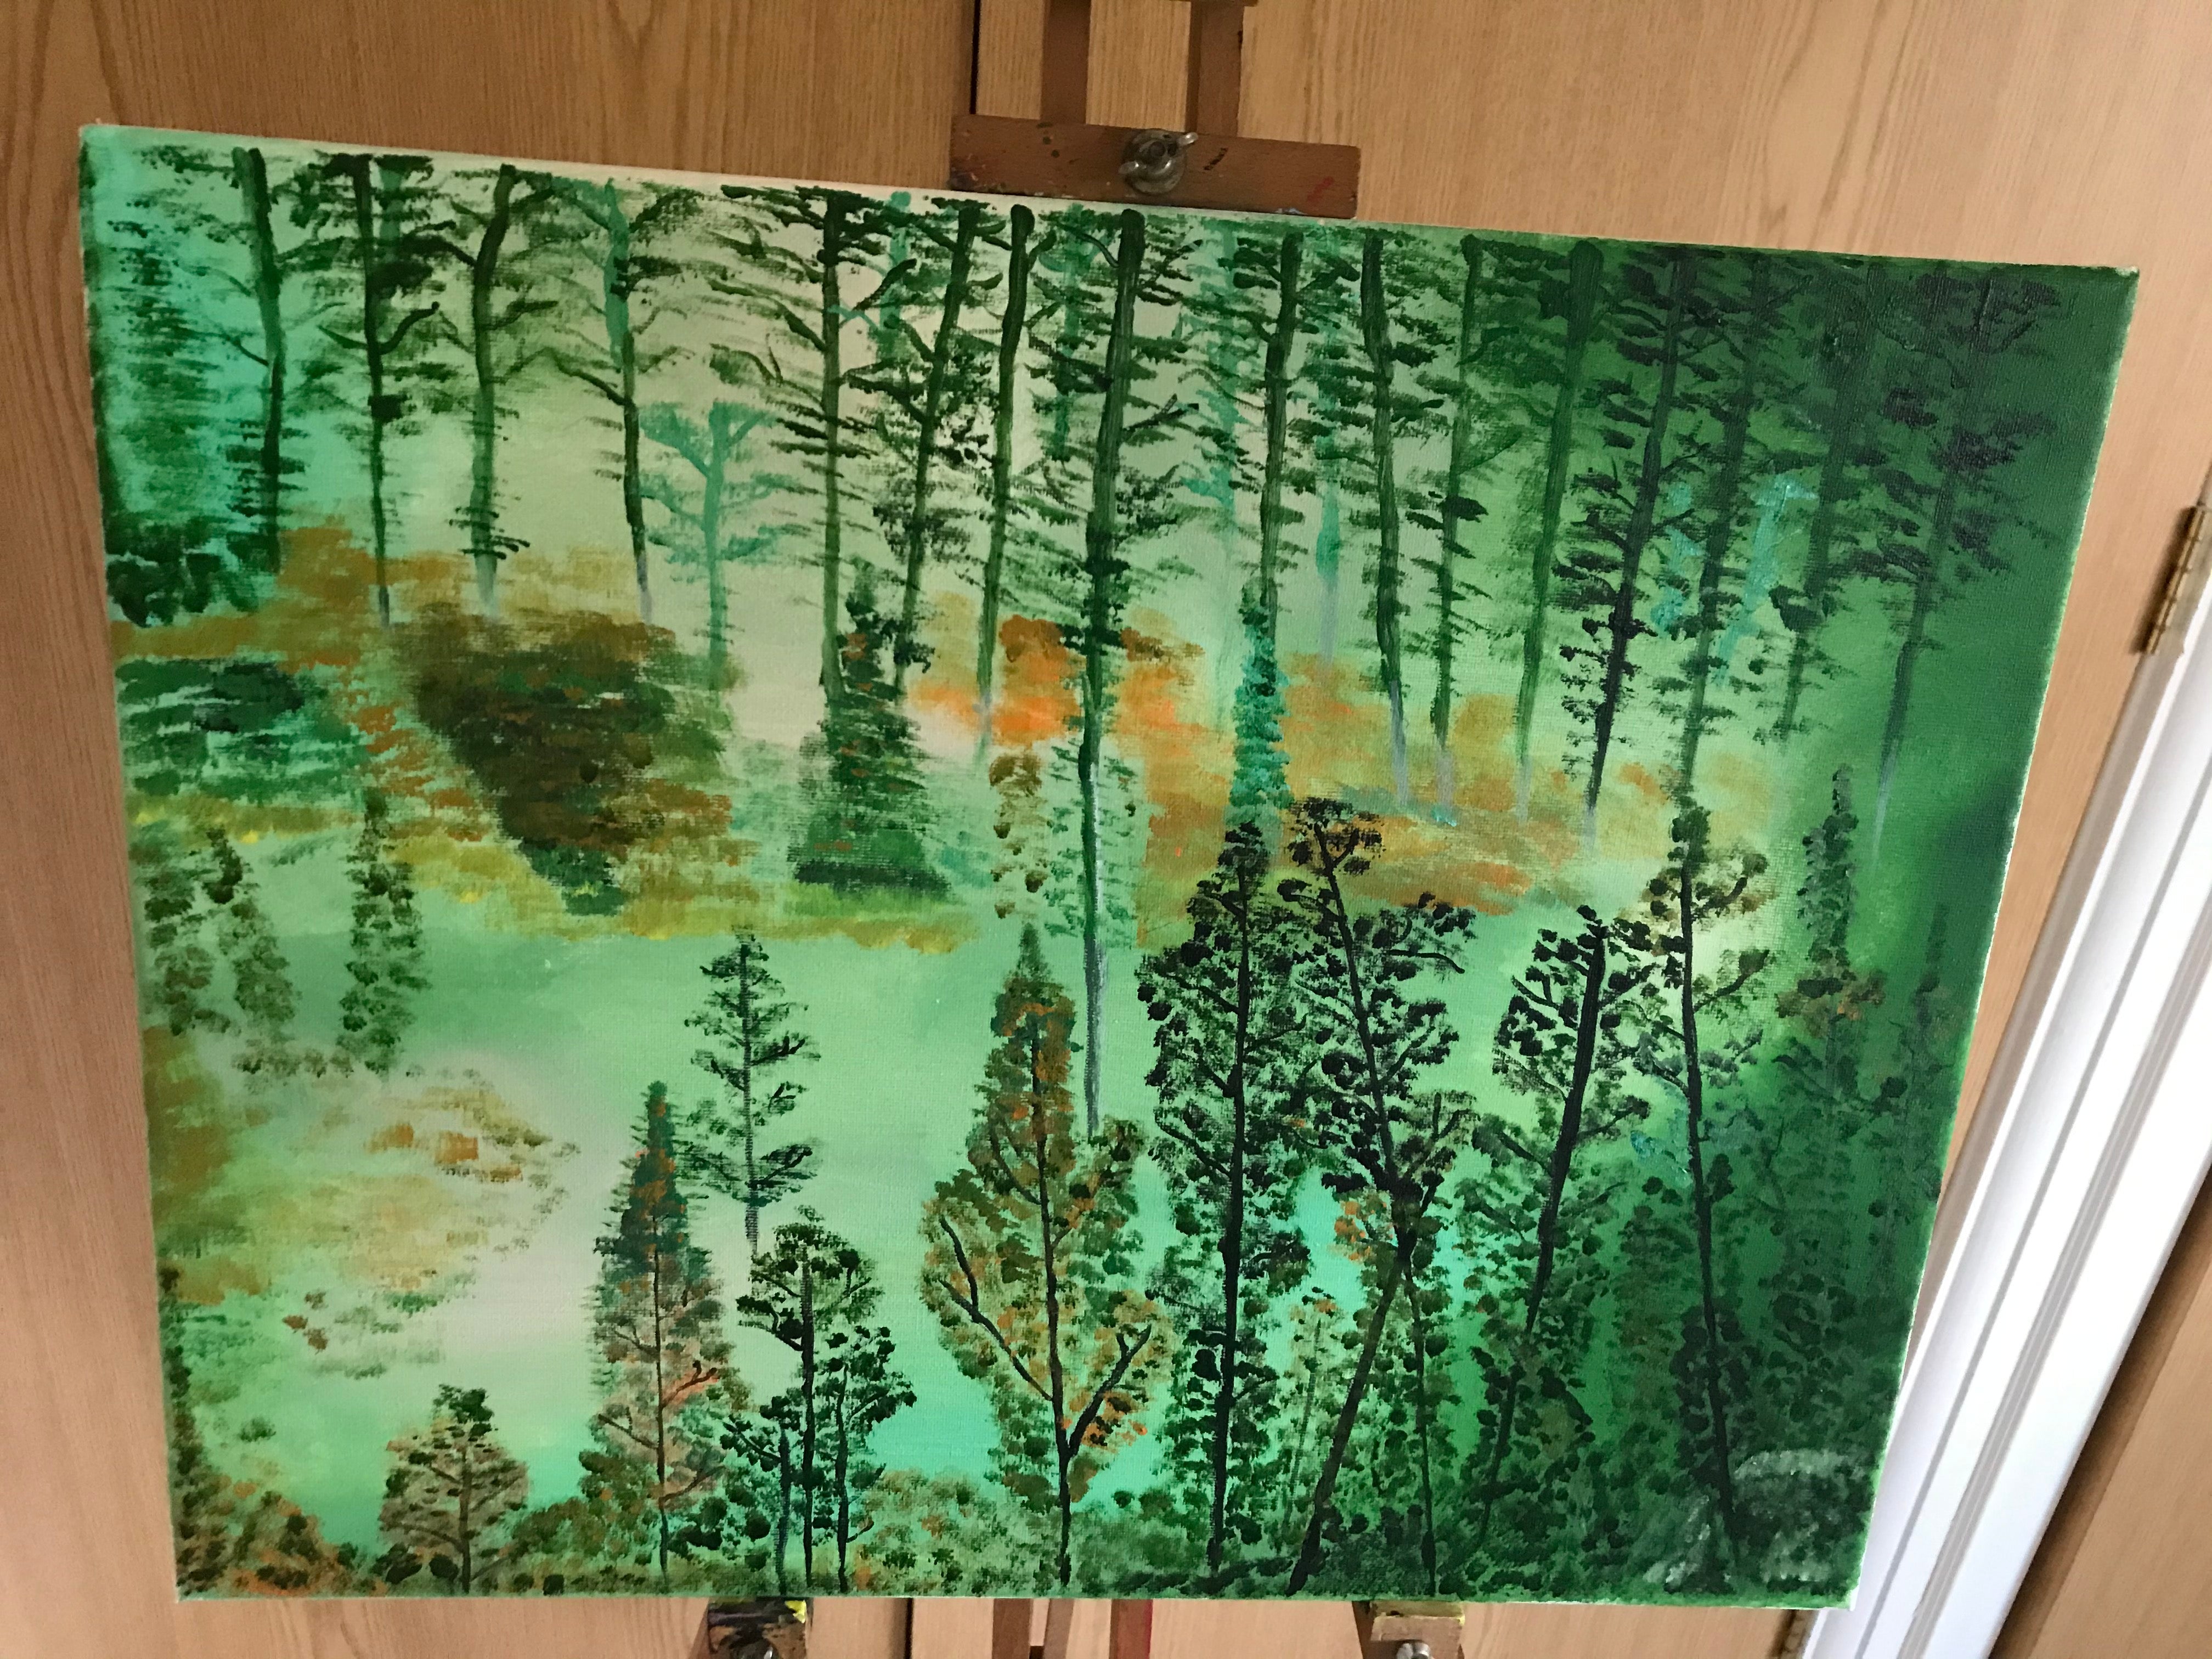 Foggy forest upgrade to Art Canva 40cm by 60cm FREE hanging kit and FREE postage